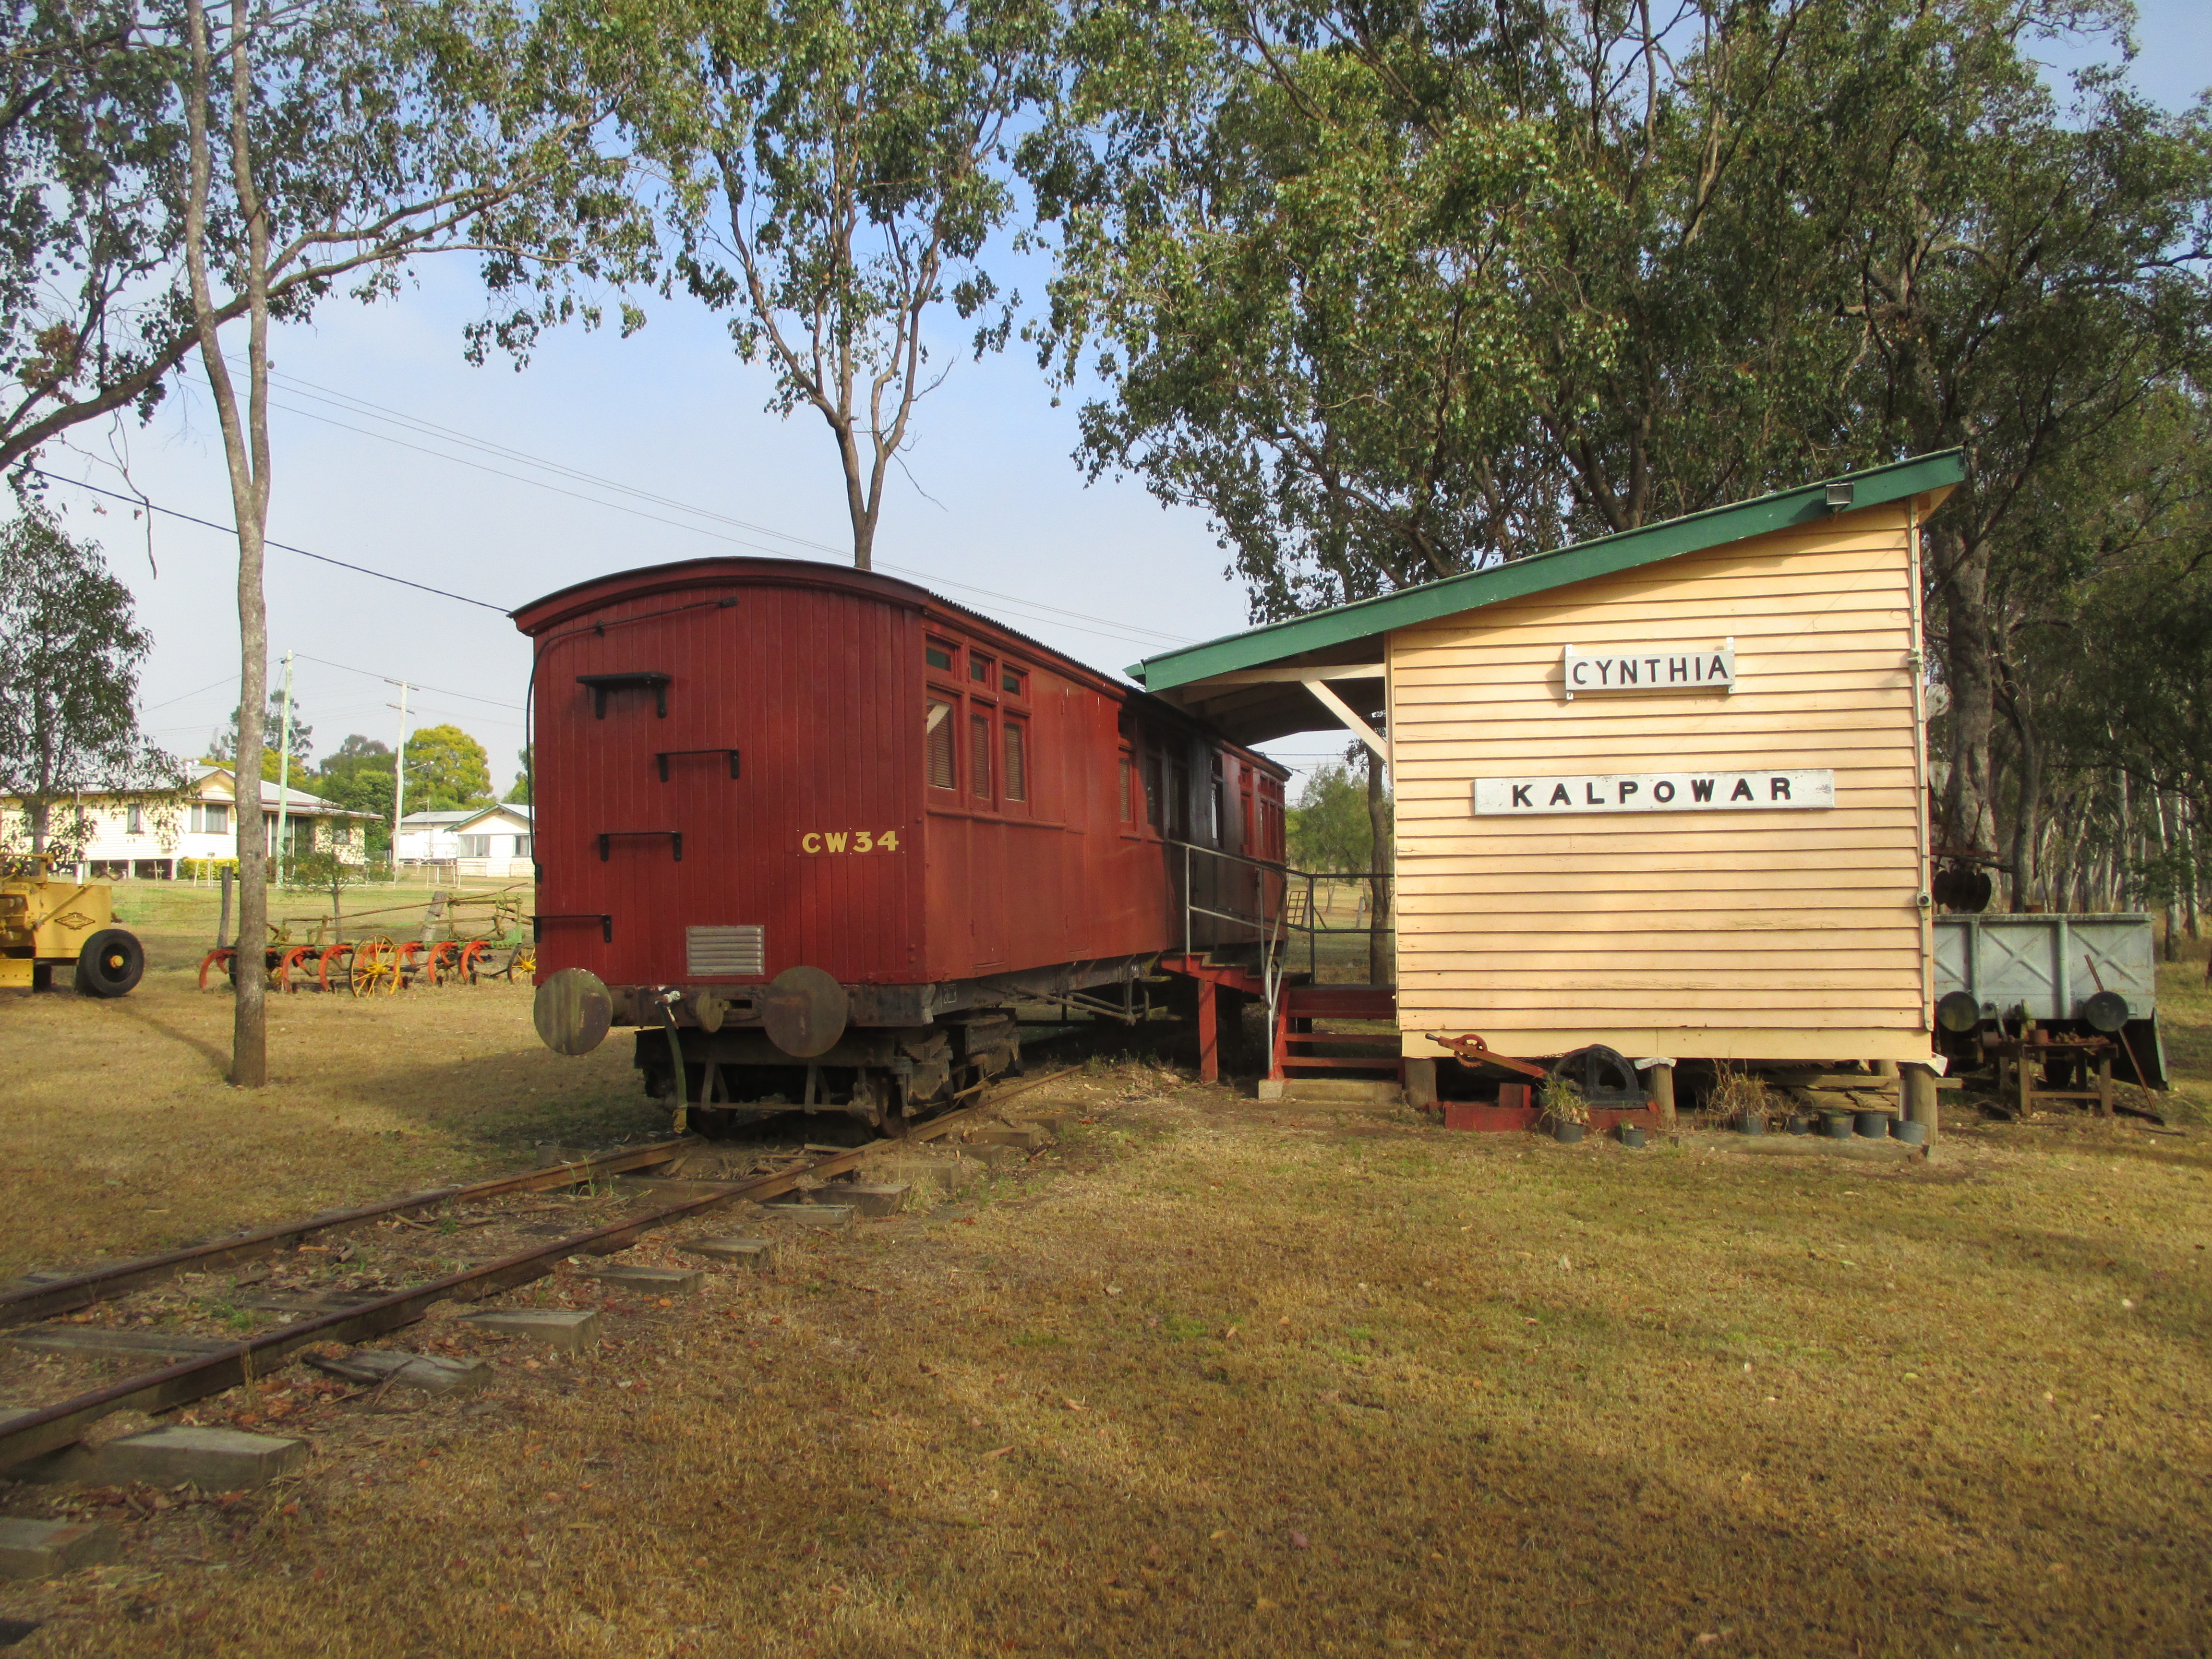 Monto Queensland : Historical Museum.!, Architecture, Building, Outdoor, Railroad, HQ Photo